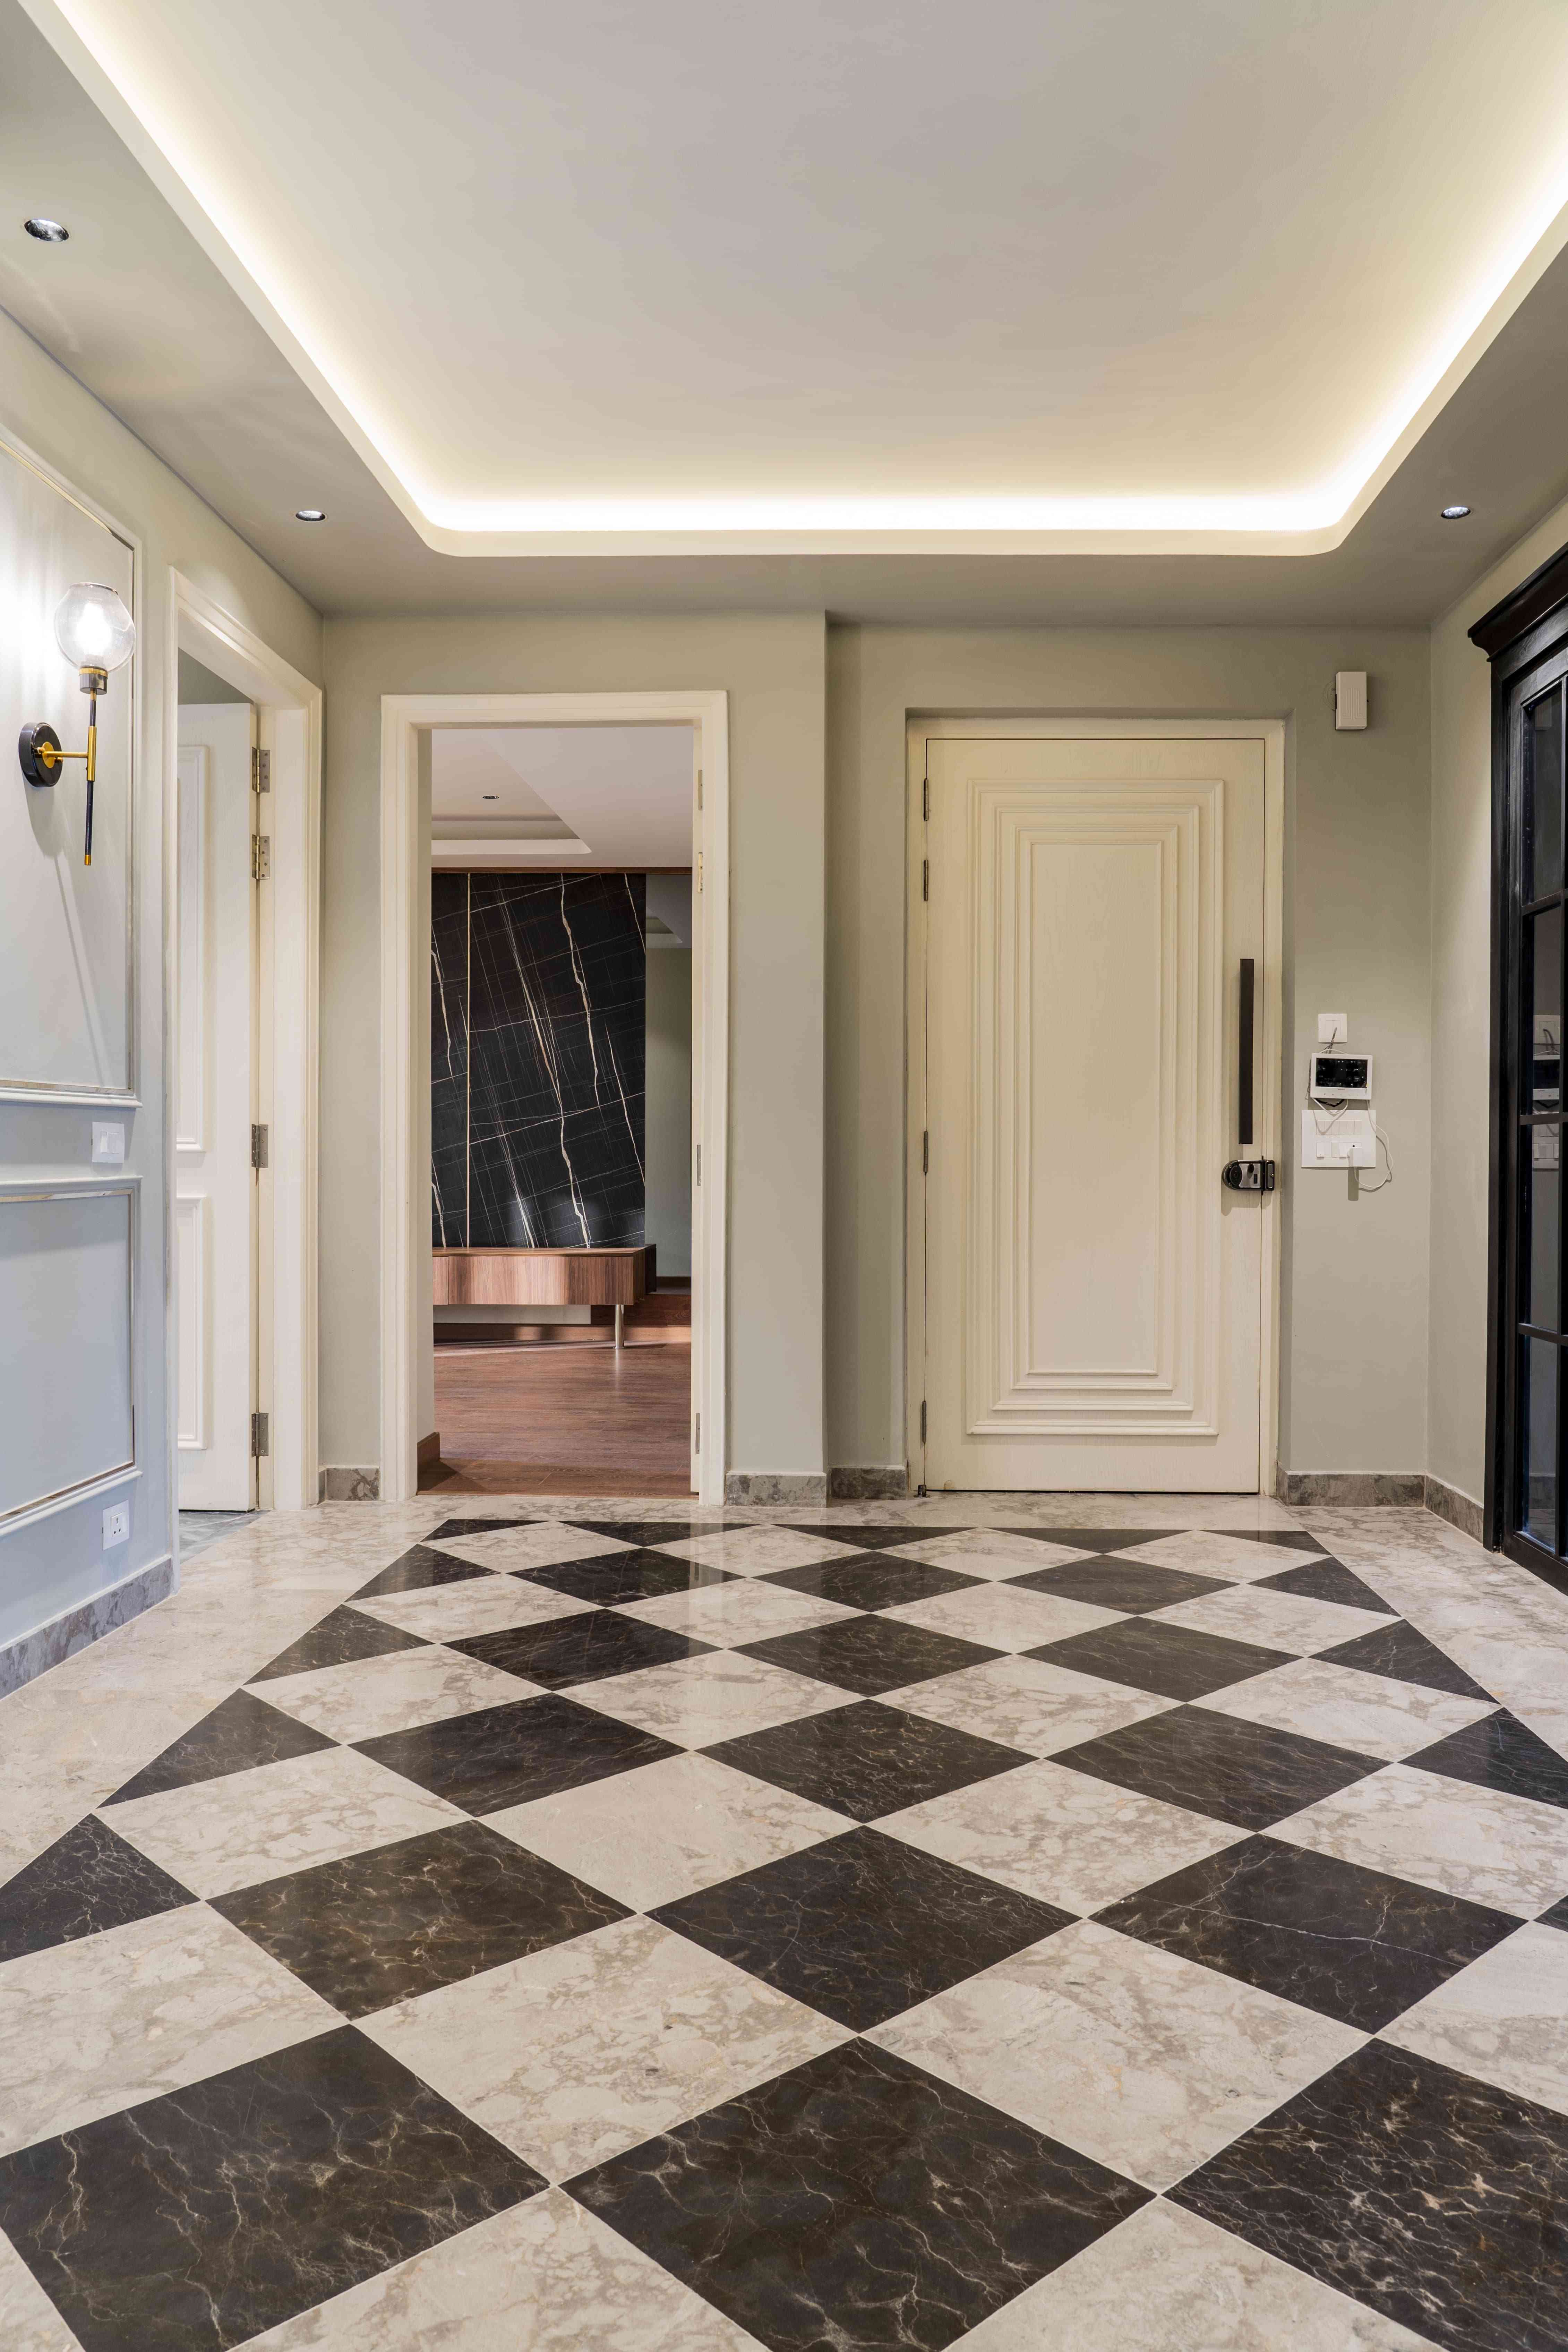 Home Entry Foyer With Neoclassical Interiors